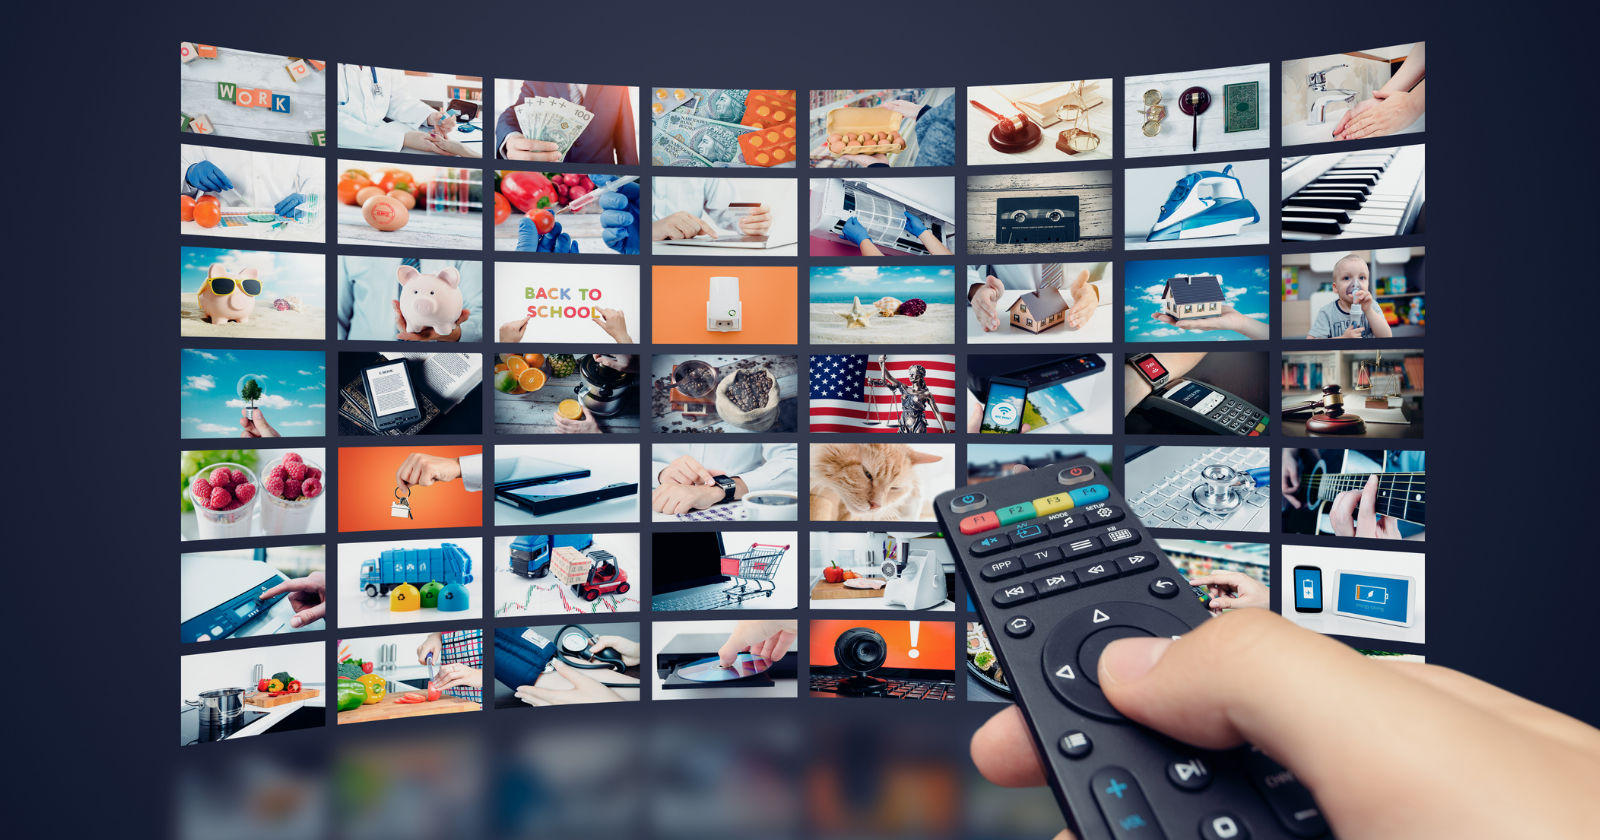 The 15 Best VOD Platforms for Video On Demand in 2022 | Dacast